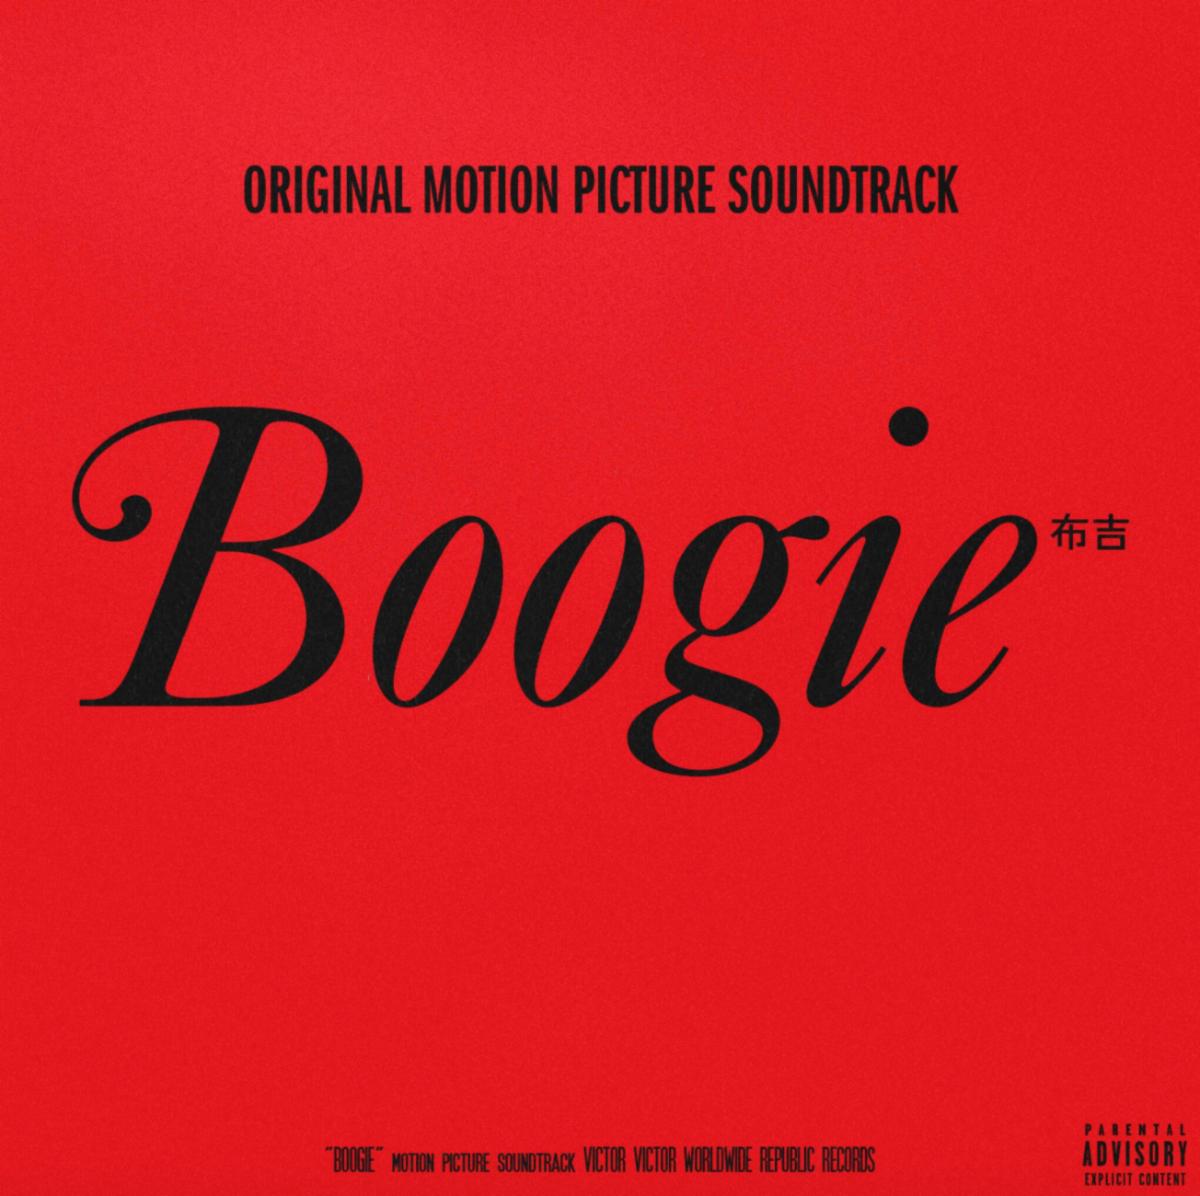 Stream the ‘Boogie’ Soundtrack Featuring Posthumous Tracks by Pop Smoke